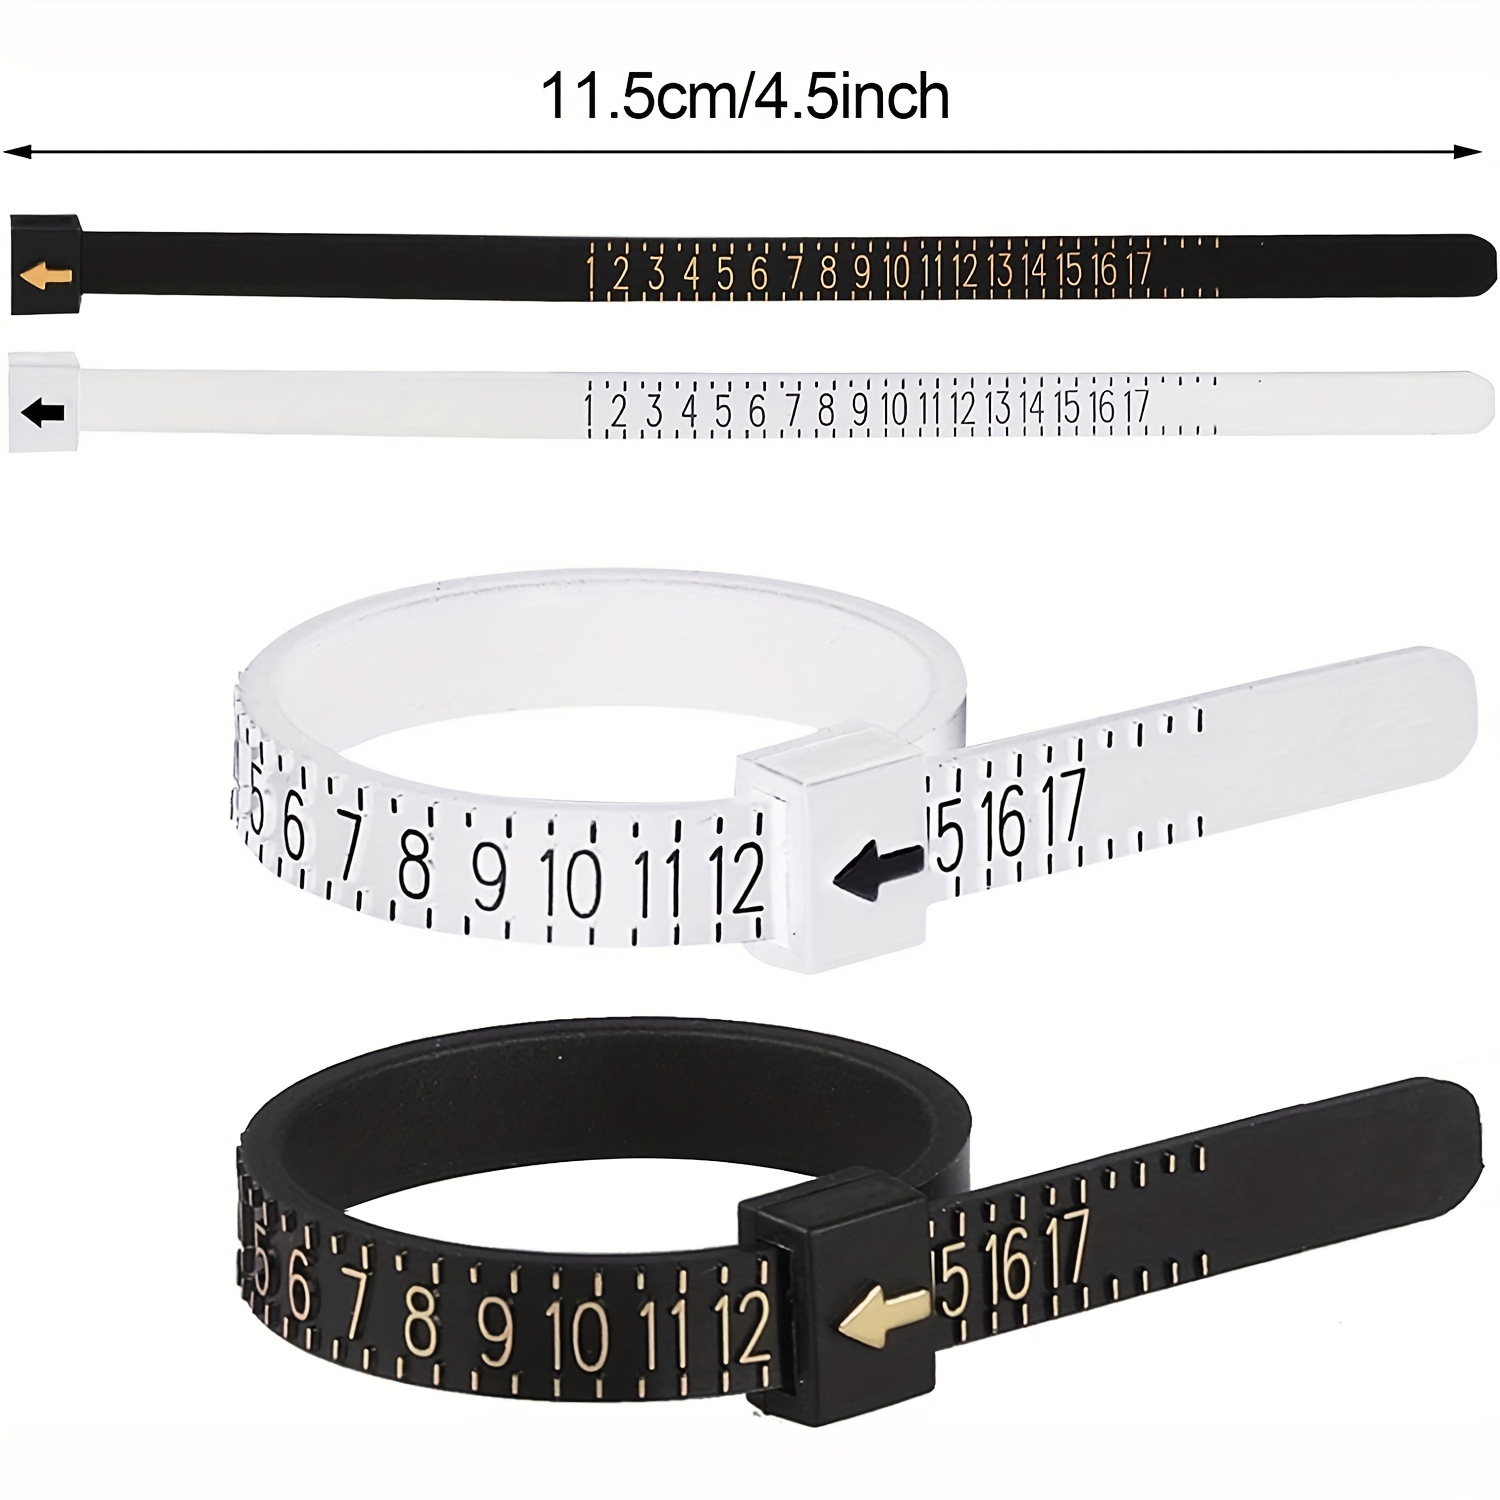 1pc Soft Ring Sizer Measuring Tool, Finger Ring Size, Ring Size Measuring  Tape, Jewelry Measure Belt, US Size 1-17 4.48 X 0.19 Inch / 11.4 X 0.5 CM